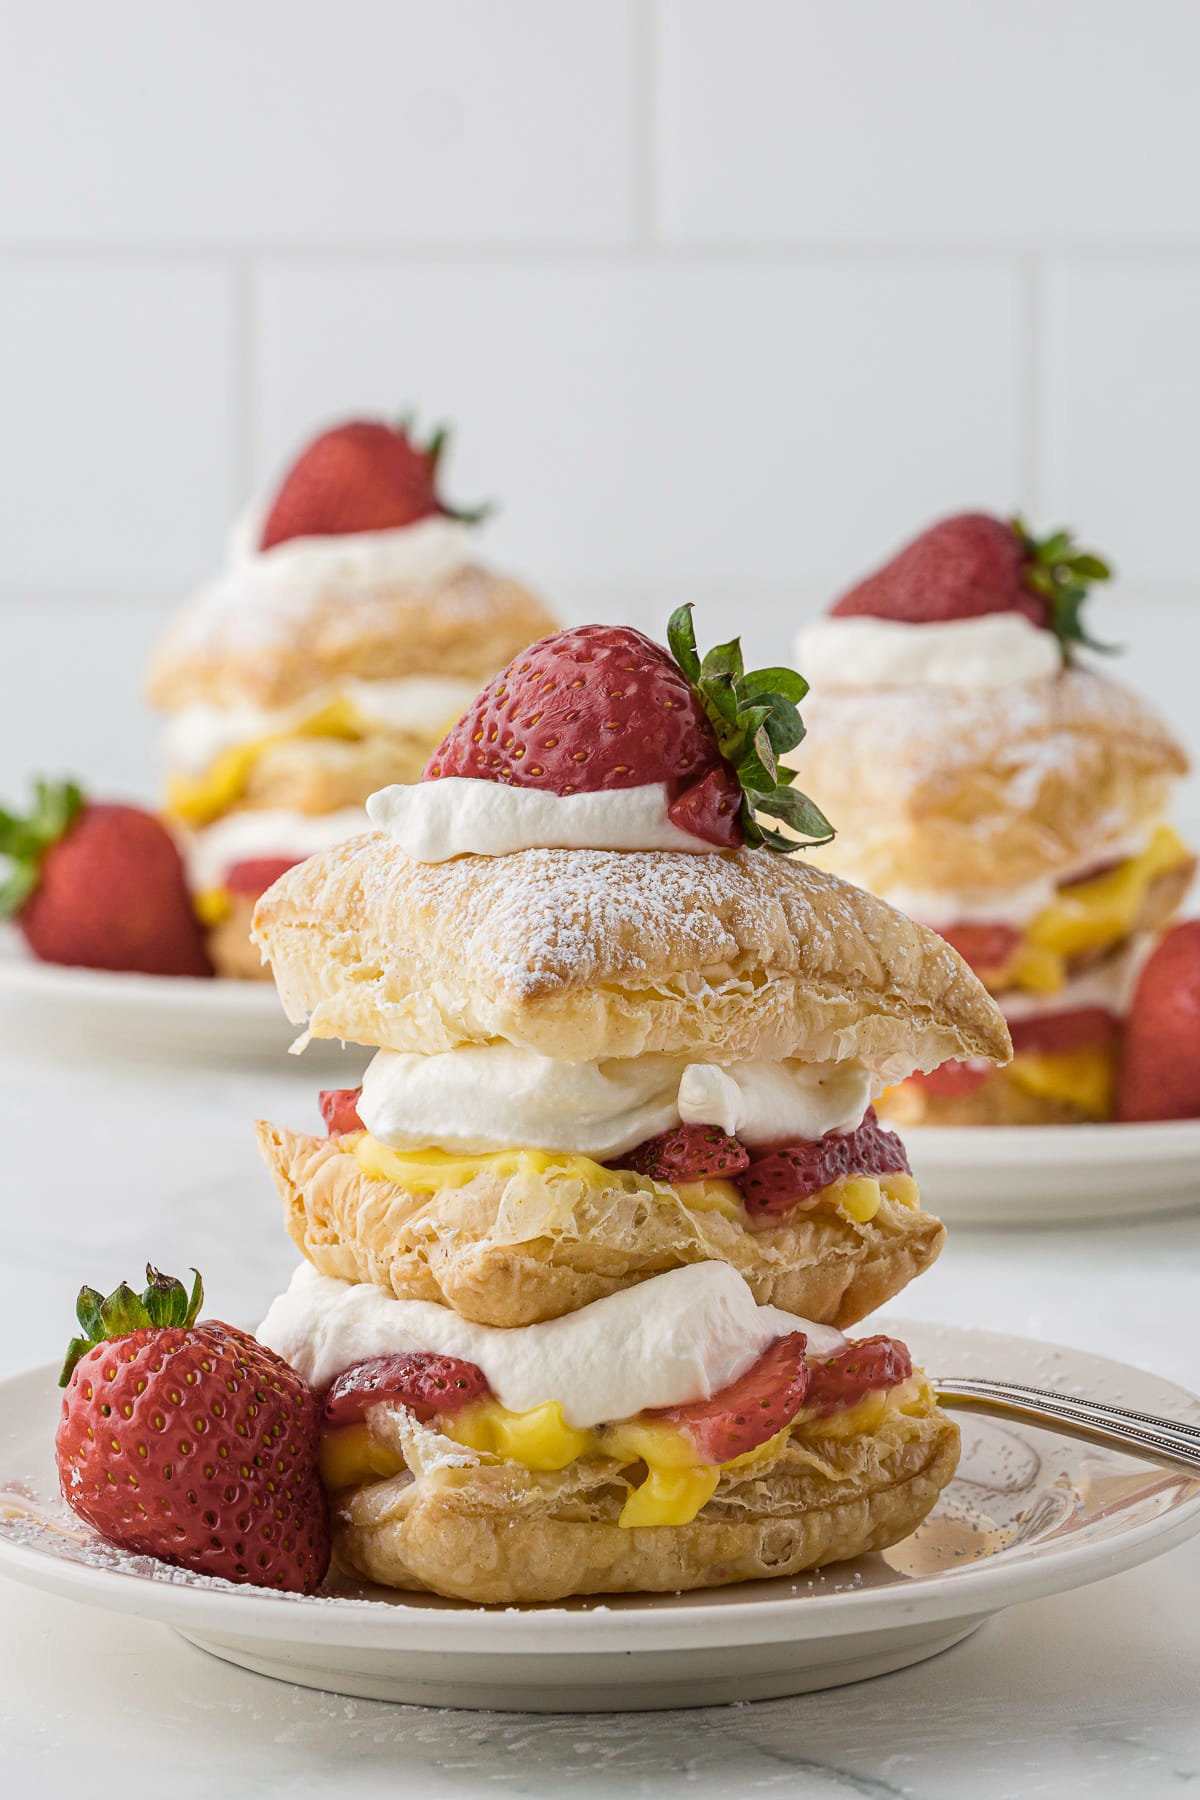 3 plated servings of Strawberry Napoleon desserts with fresh strawberries